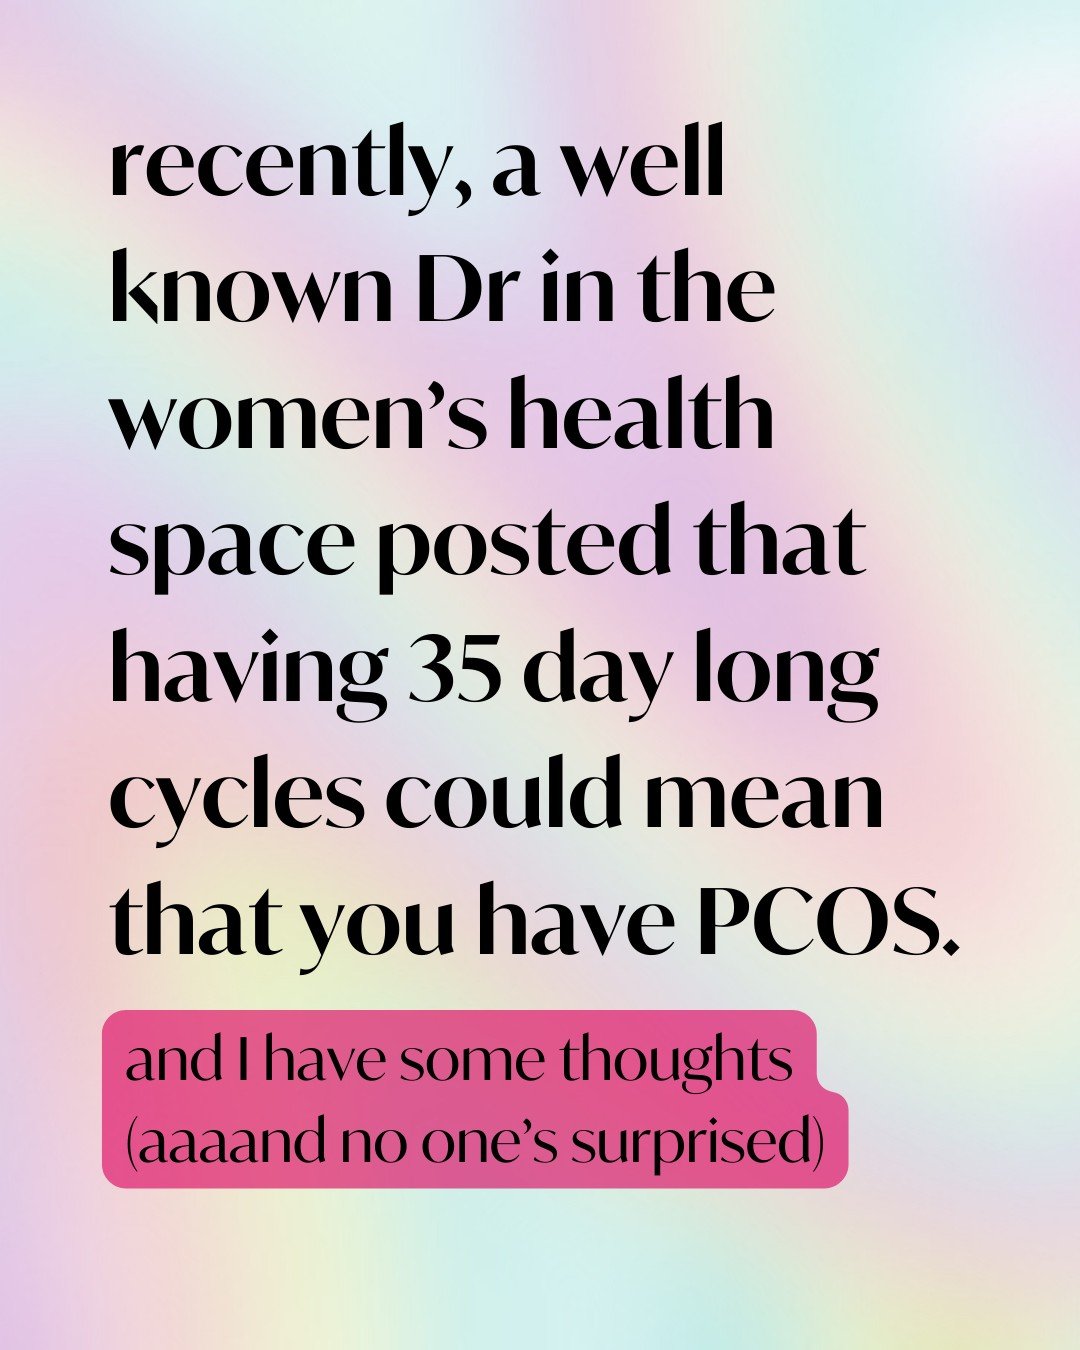 some different thoughts on PCOS compared to most of the PCOS content goin' around town 🤷&zwj;♀️

and in classic Karinda fashion, I'm encouraging you to err on the side of not getting to attached to any labels or diagnoses, because you're a bloody lo